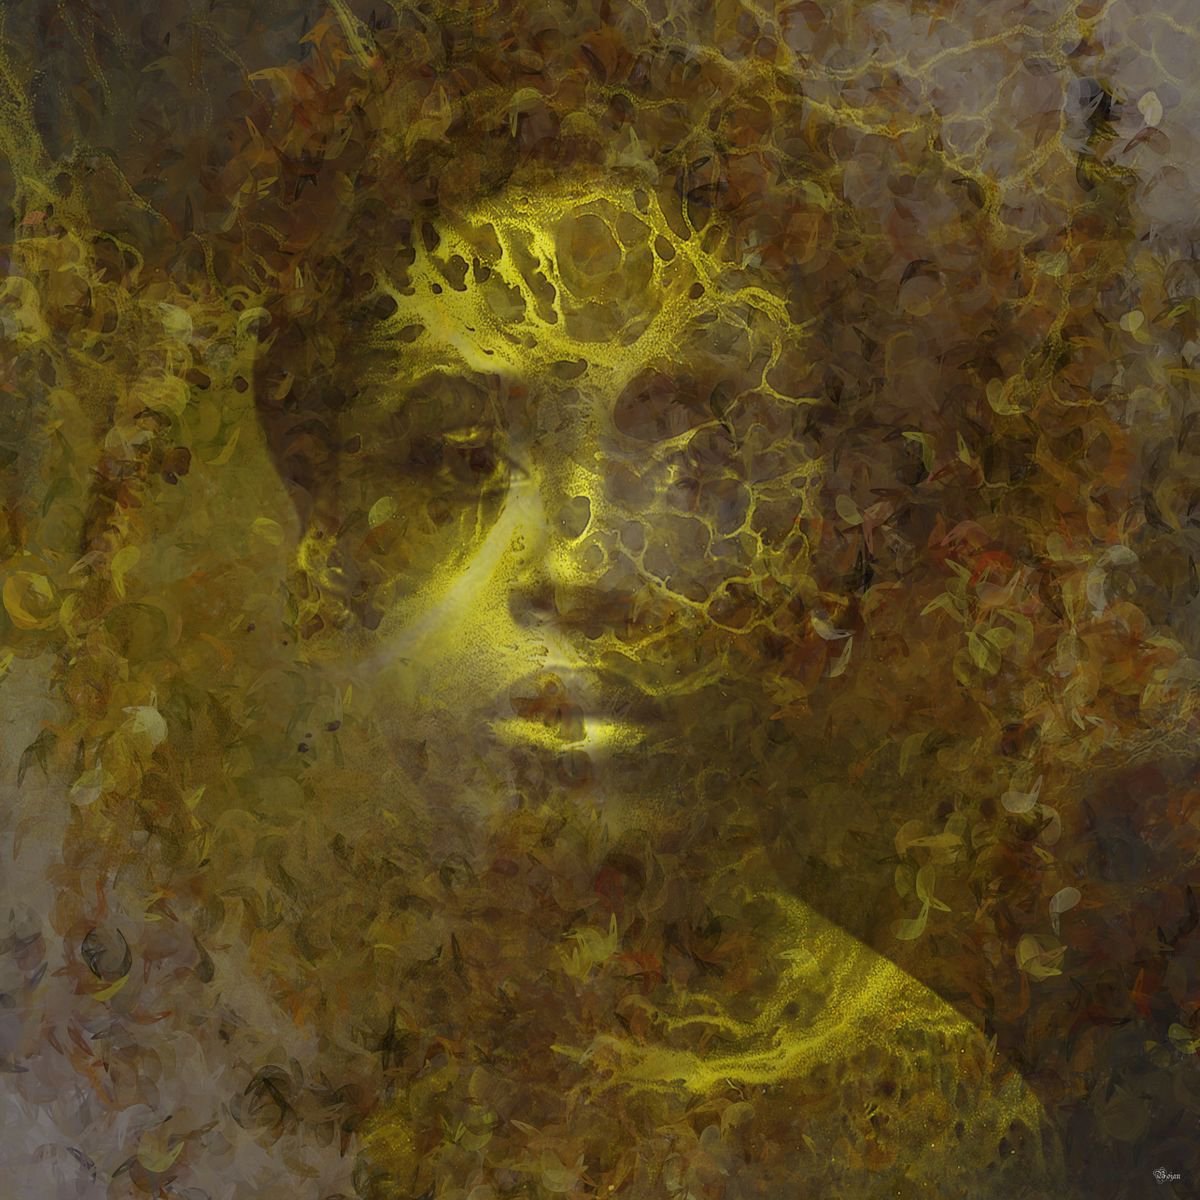 Gold in the Universe by Bojan Jevtic